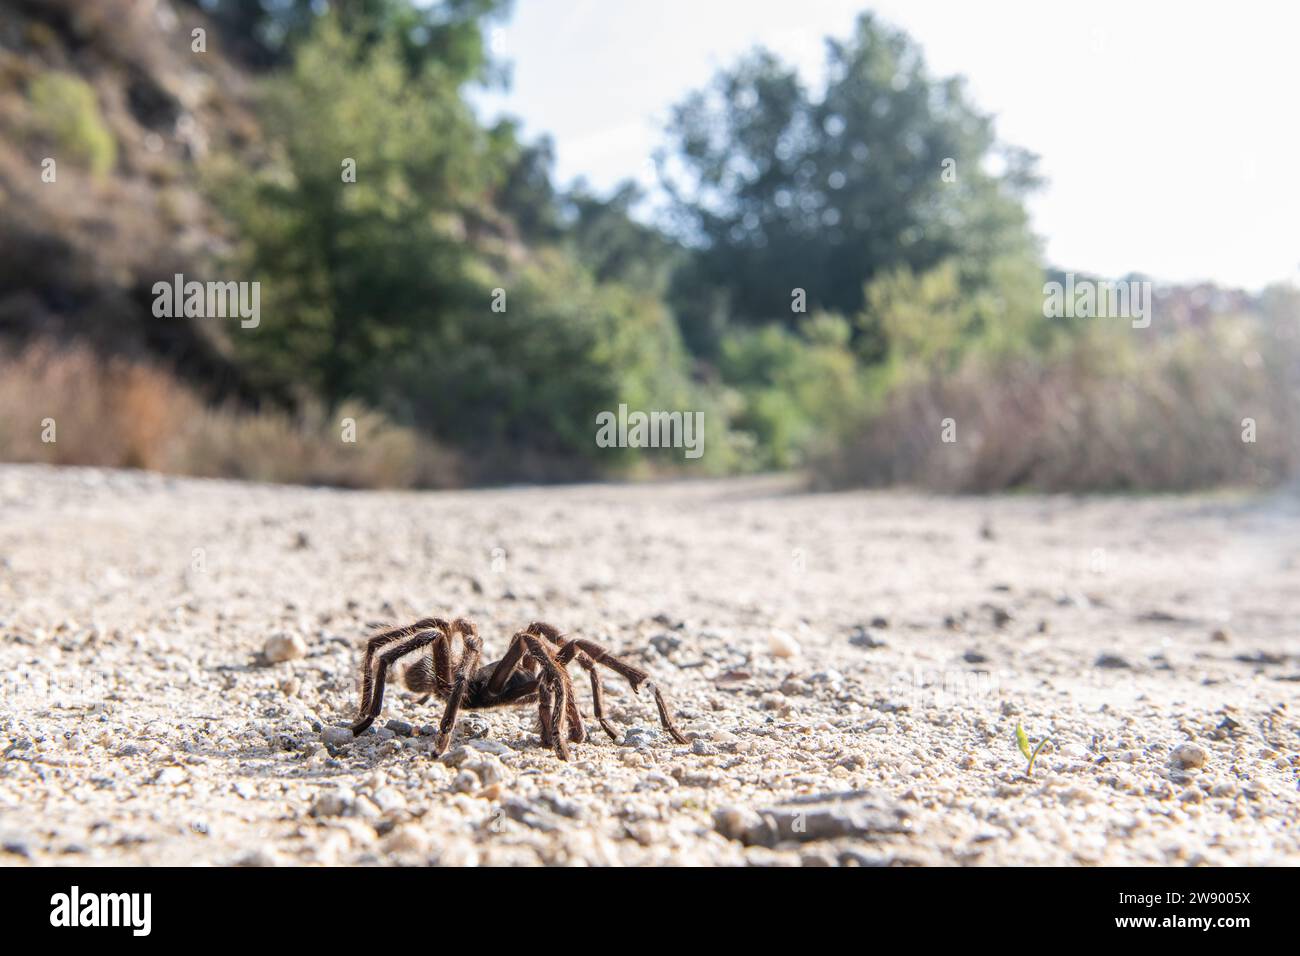 Male Desert Tarantula, Aphonopelma iodius, crossing a road during the spiders migration where they come into the open to look for mates in California. Stock Photo